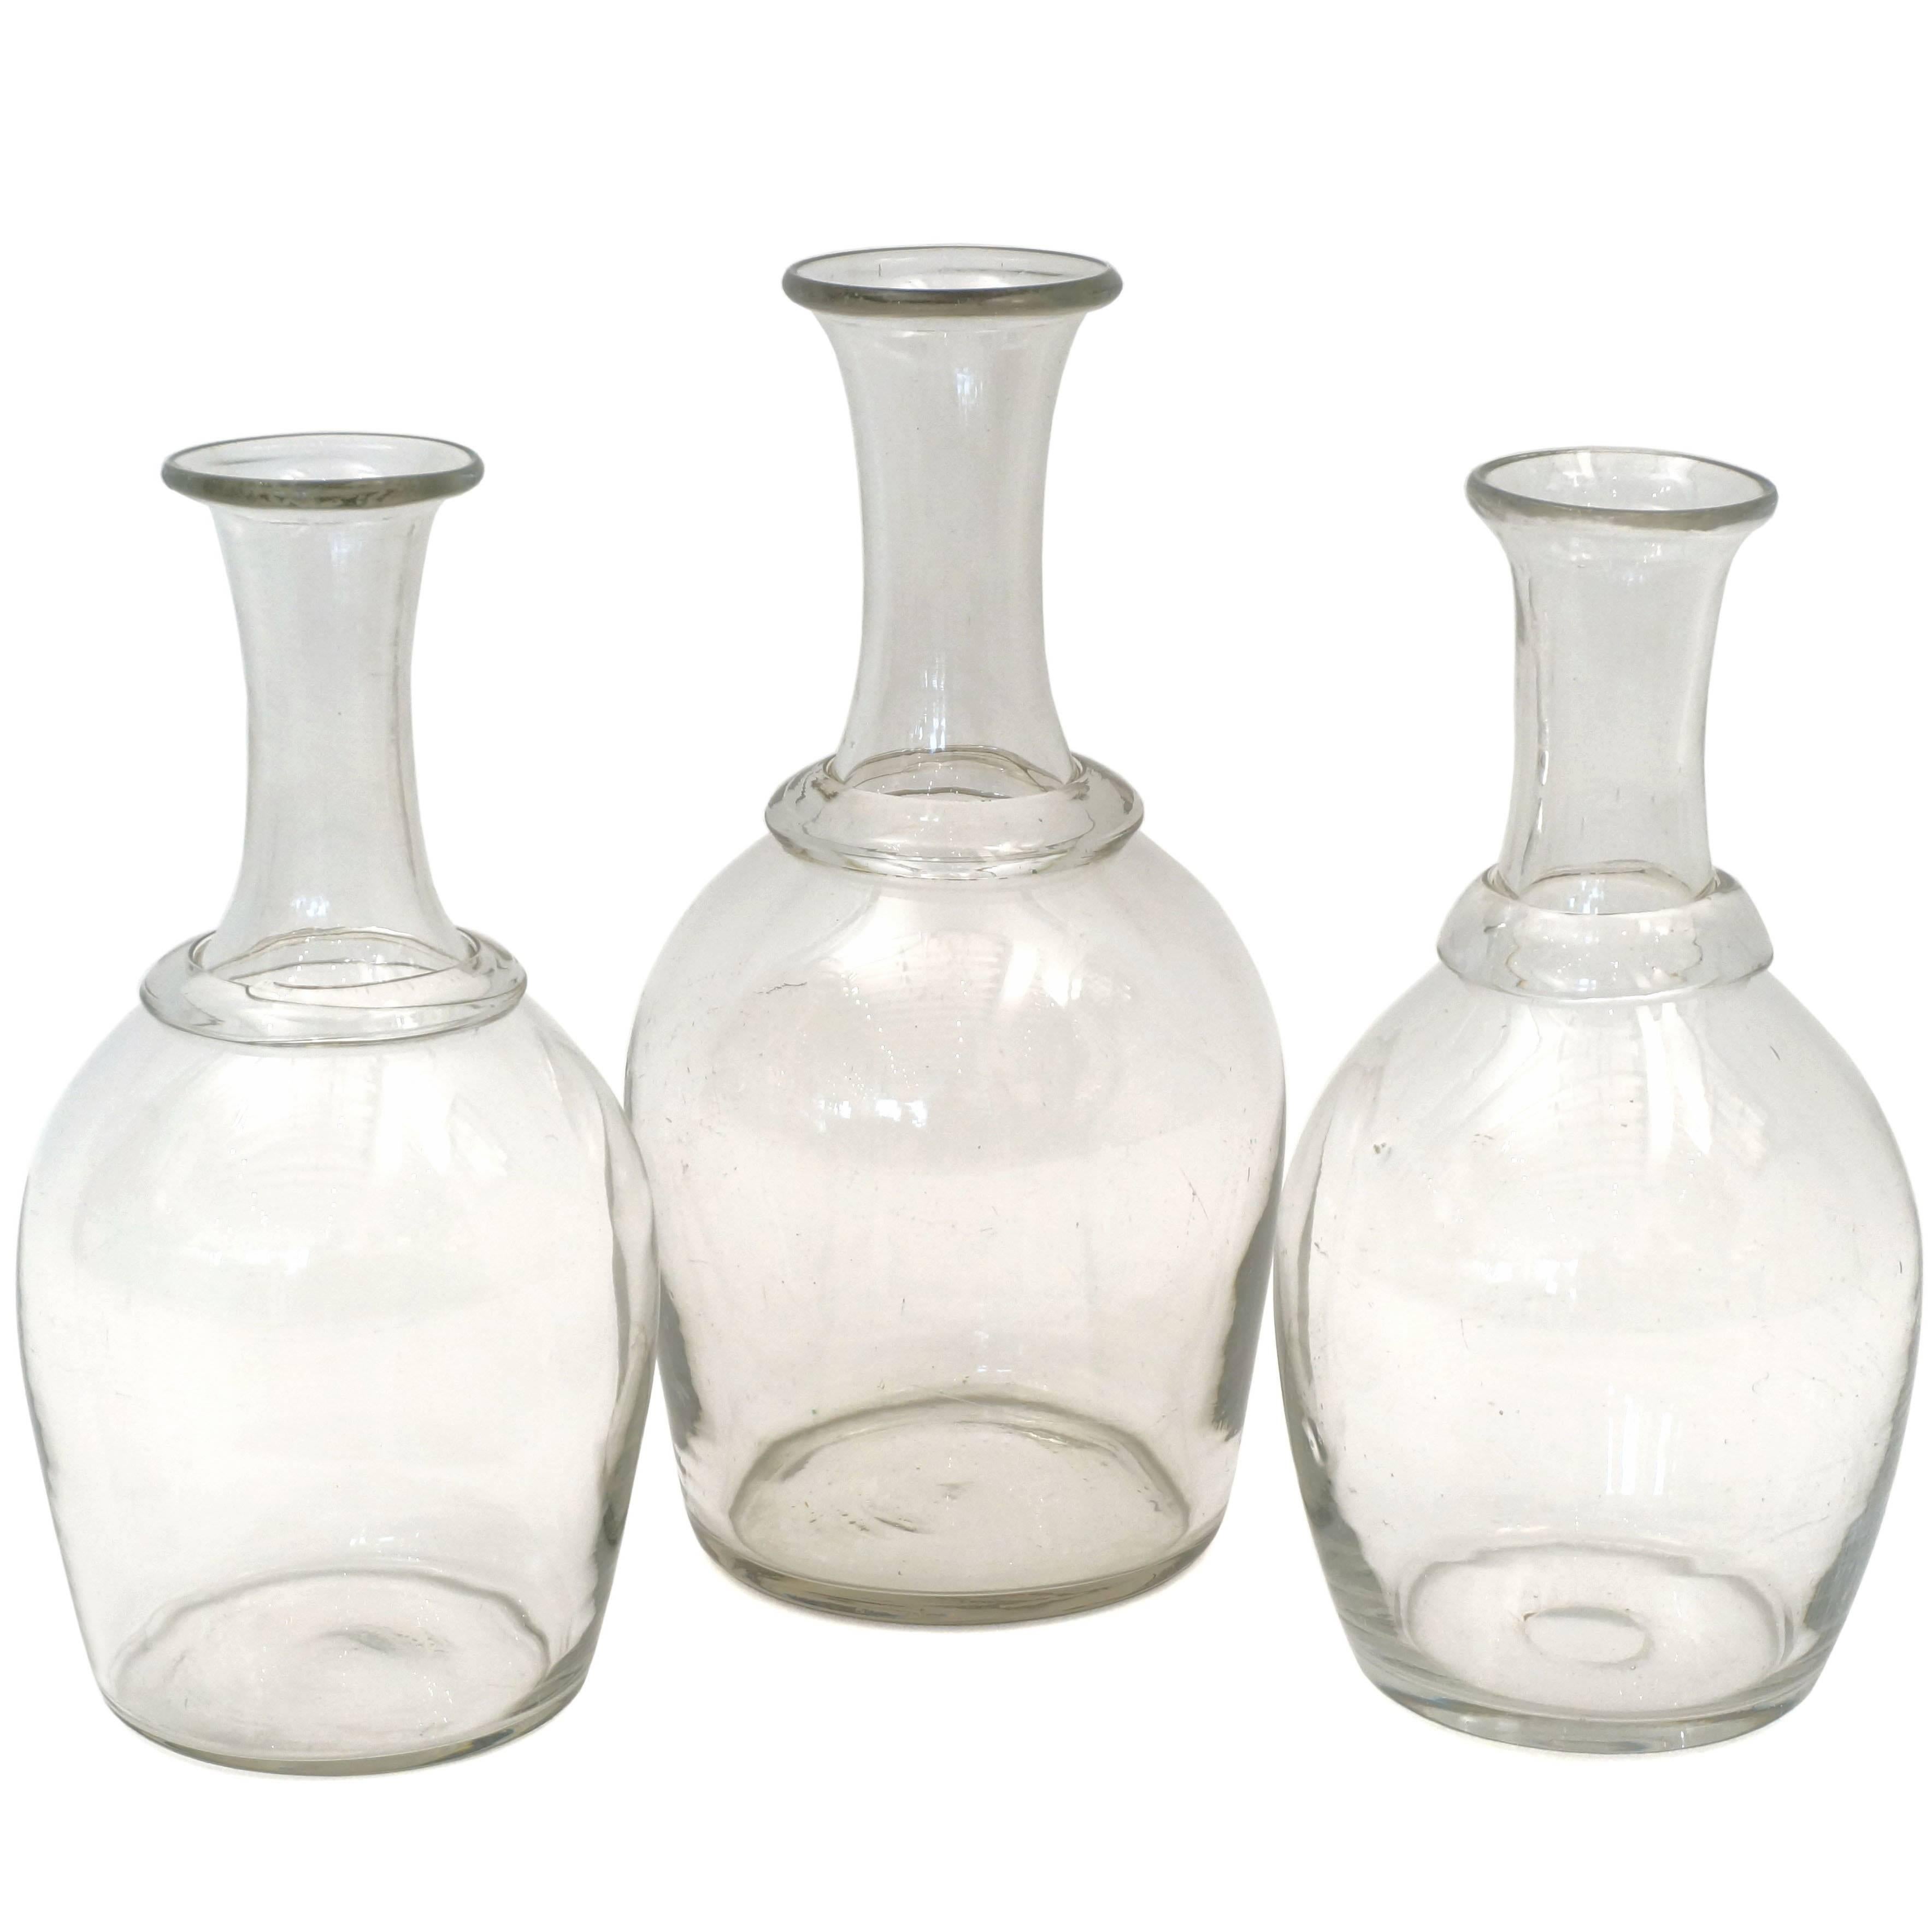 Set of Three Antique French Handblown Glass Decanters